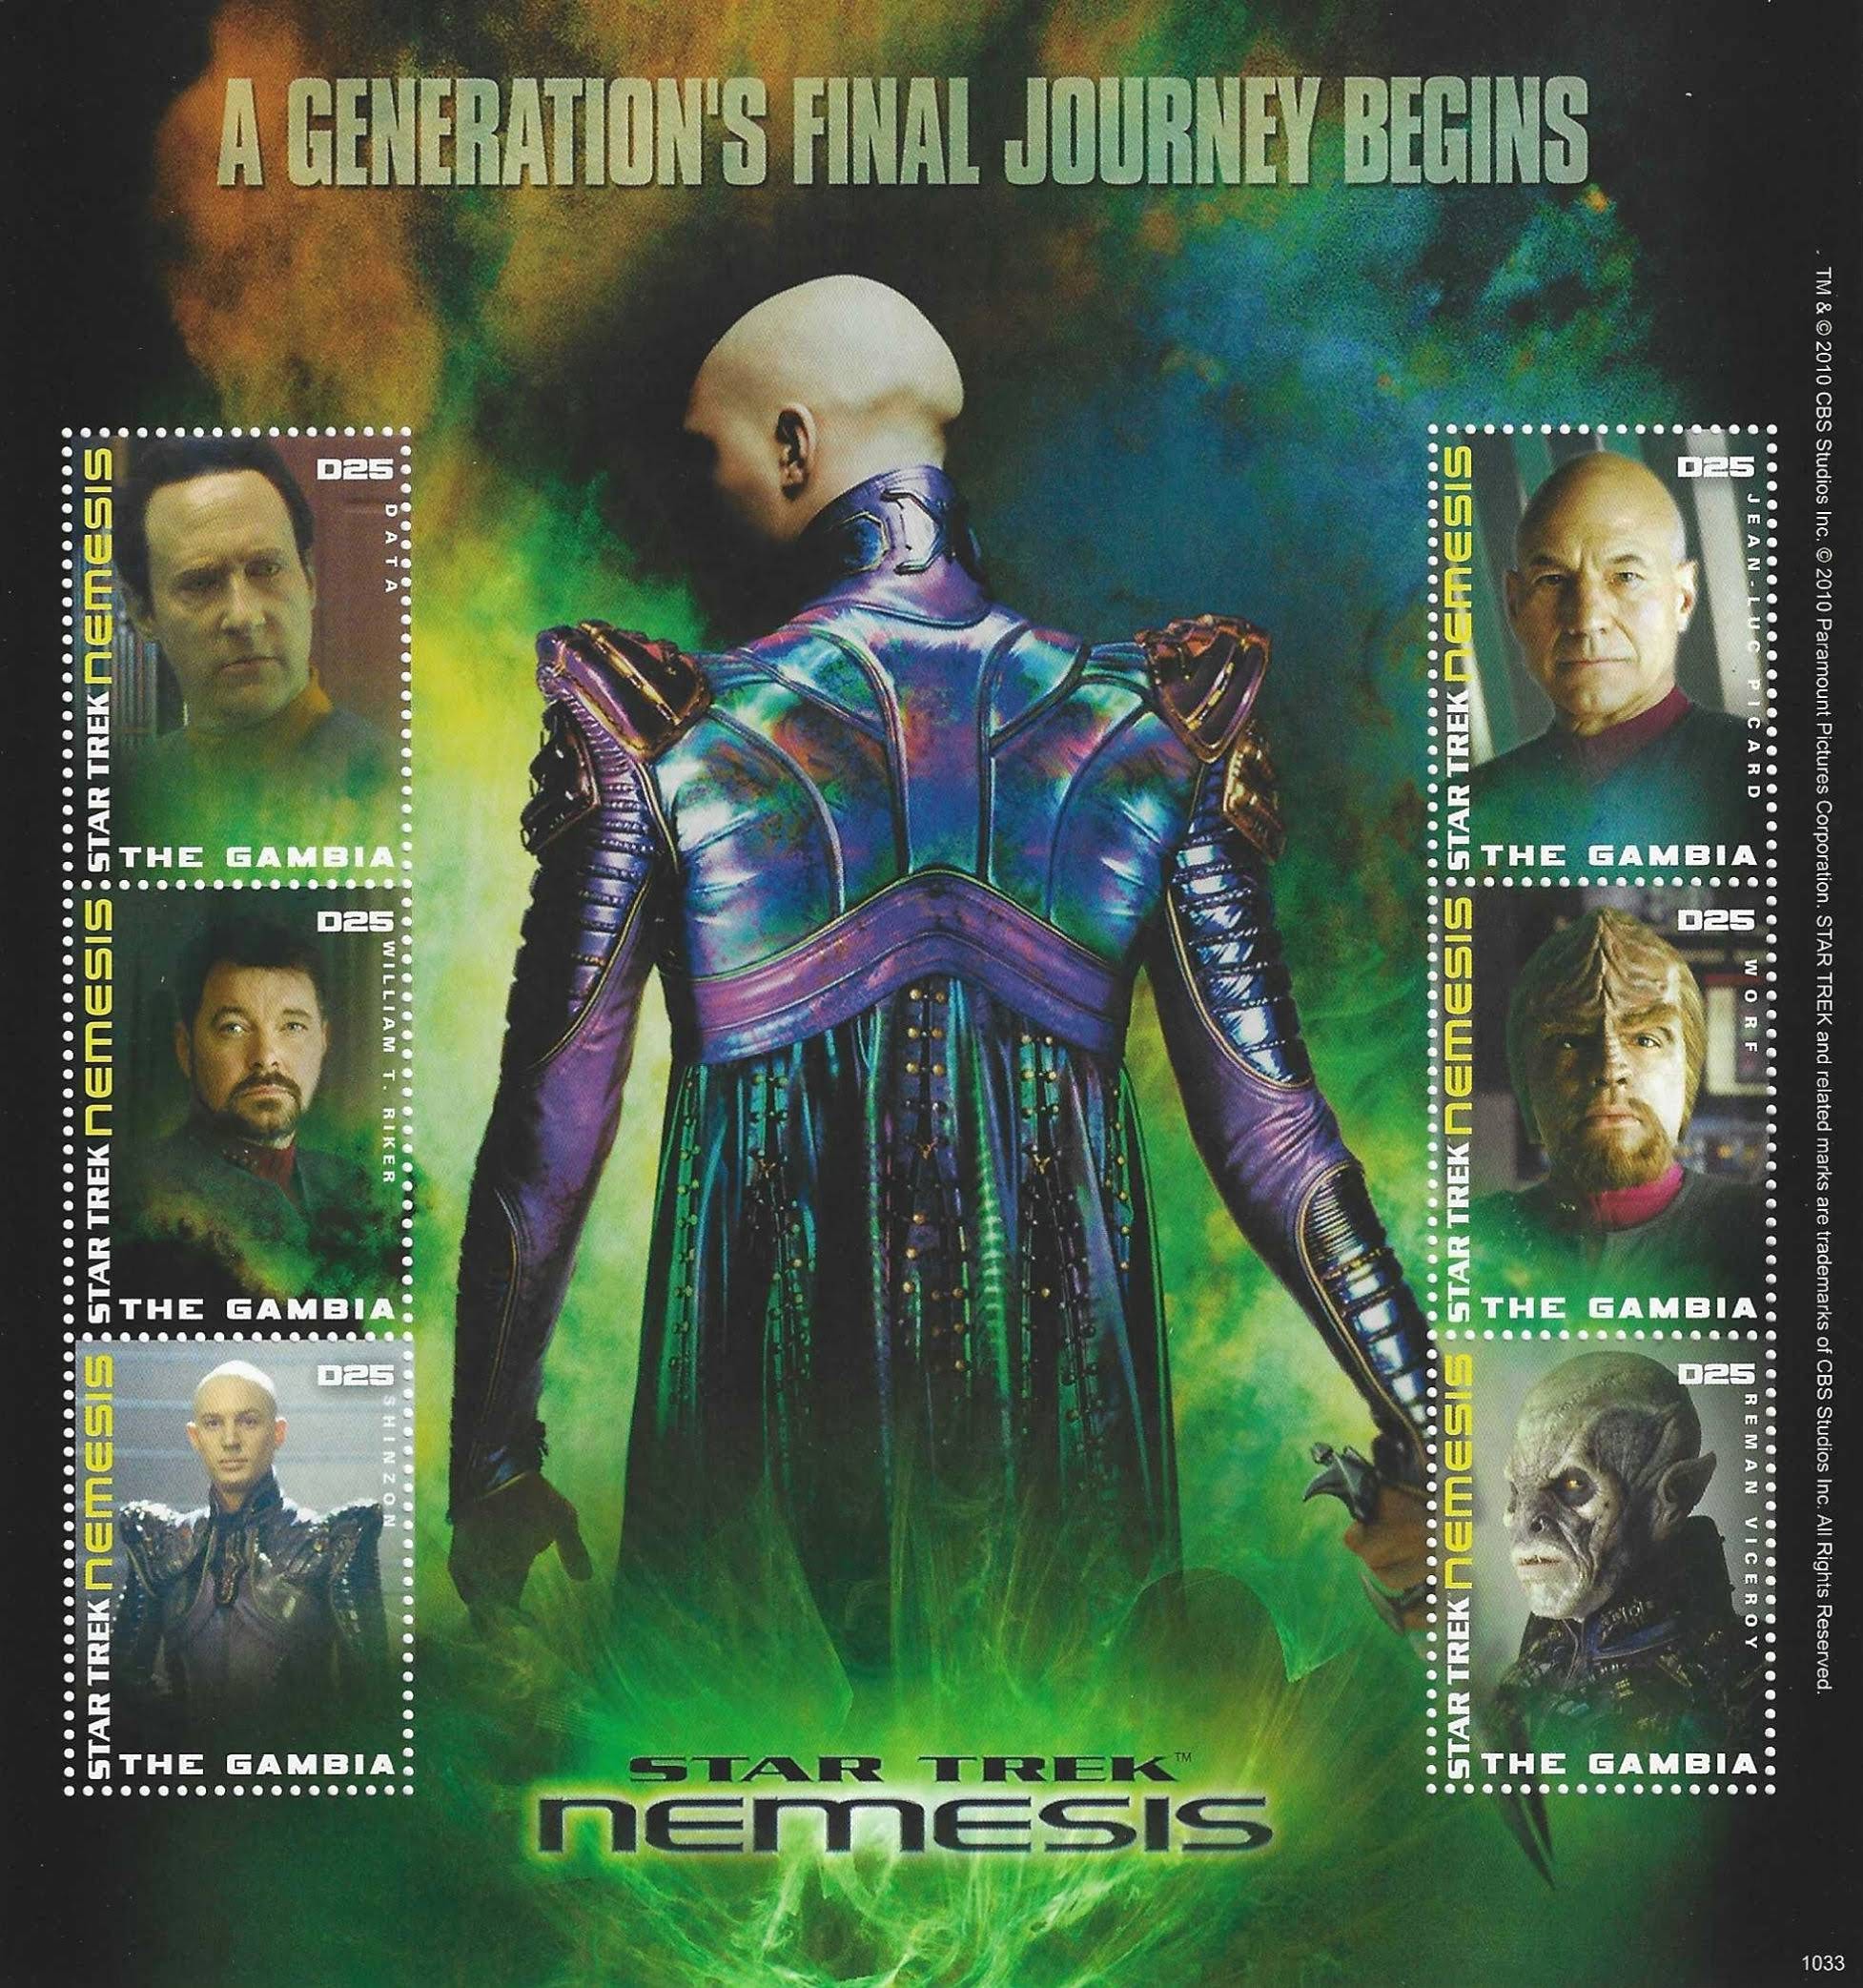 Star Trek stamps from Gambia